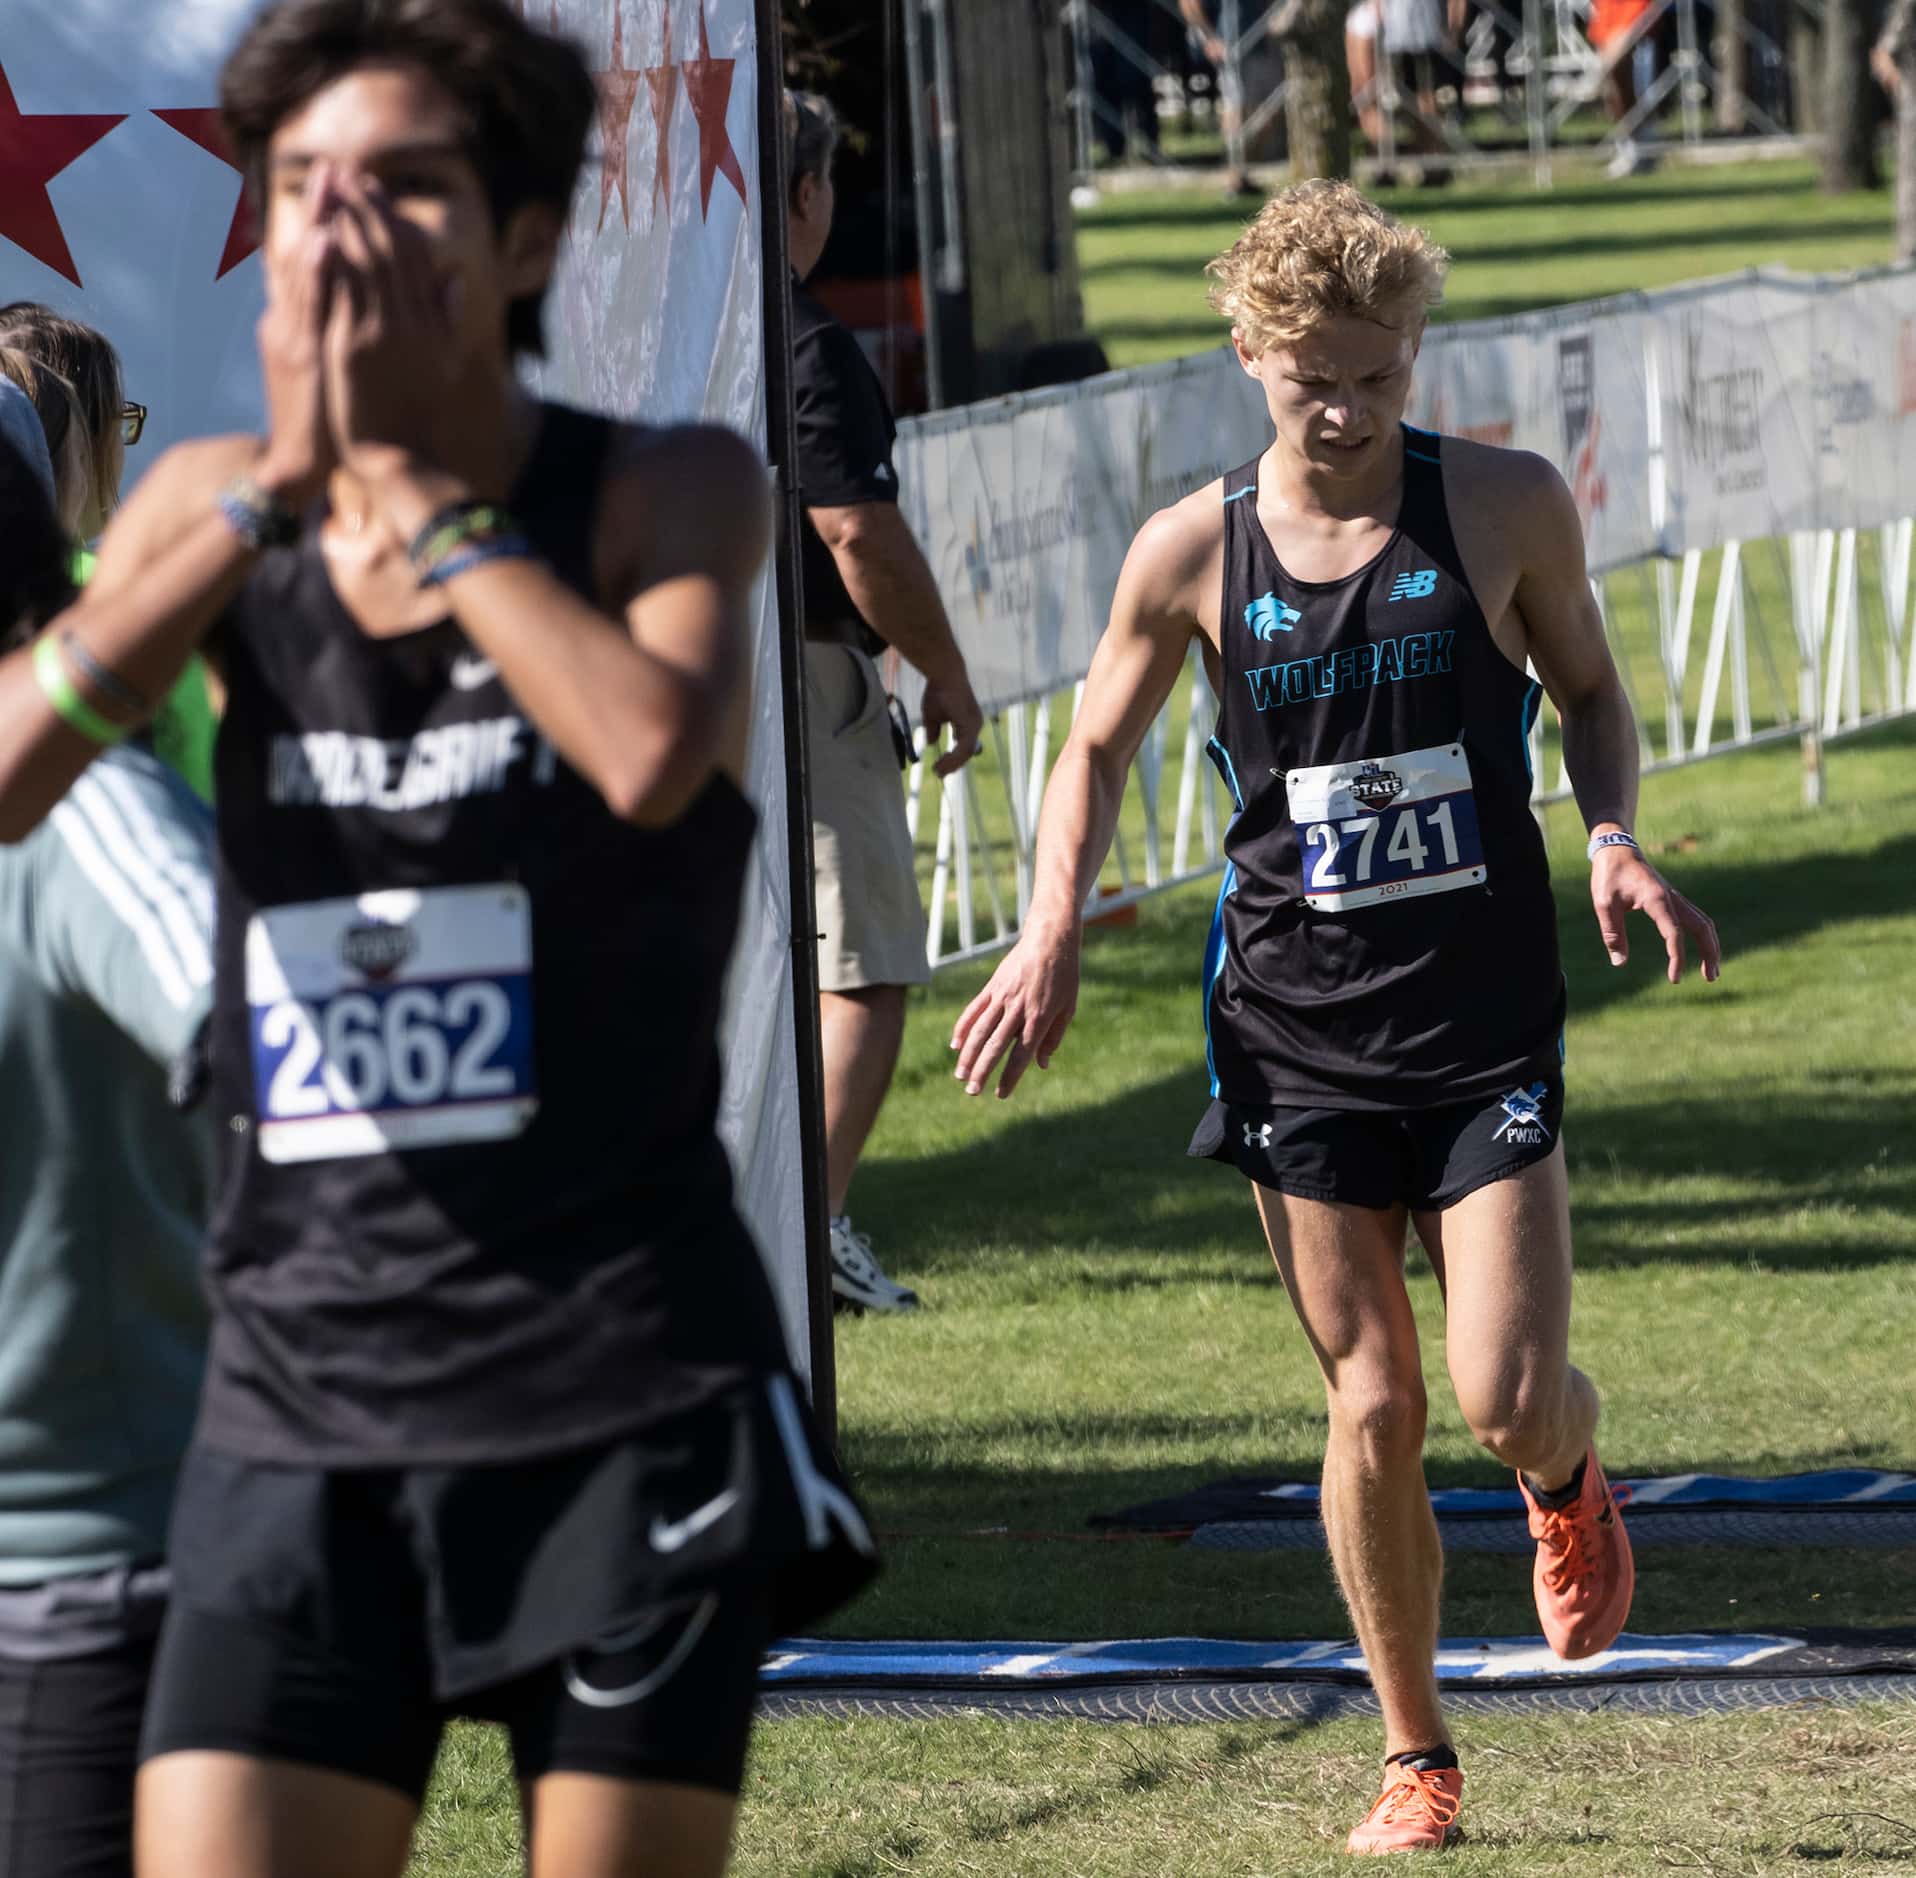 Plano West Hudson Heikkinen, (2741), crosses the finish line in second behind, Austin...